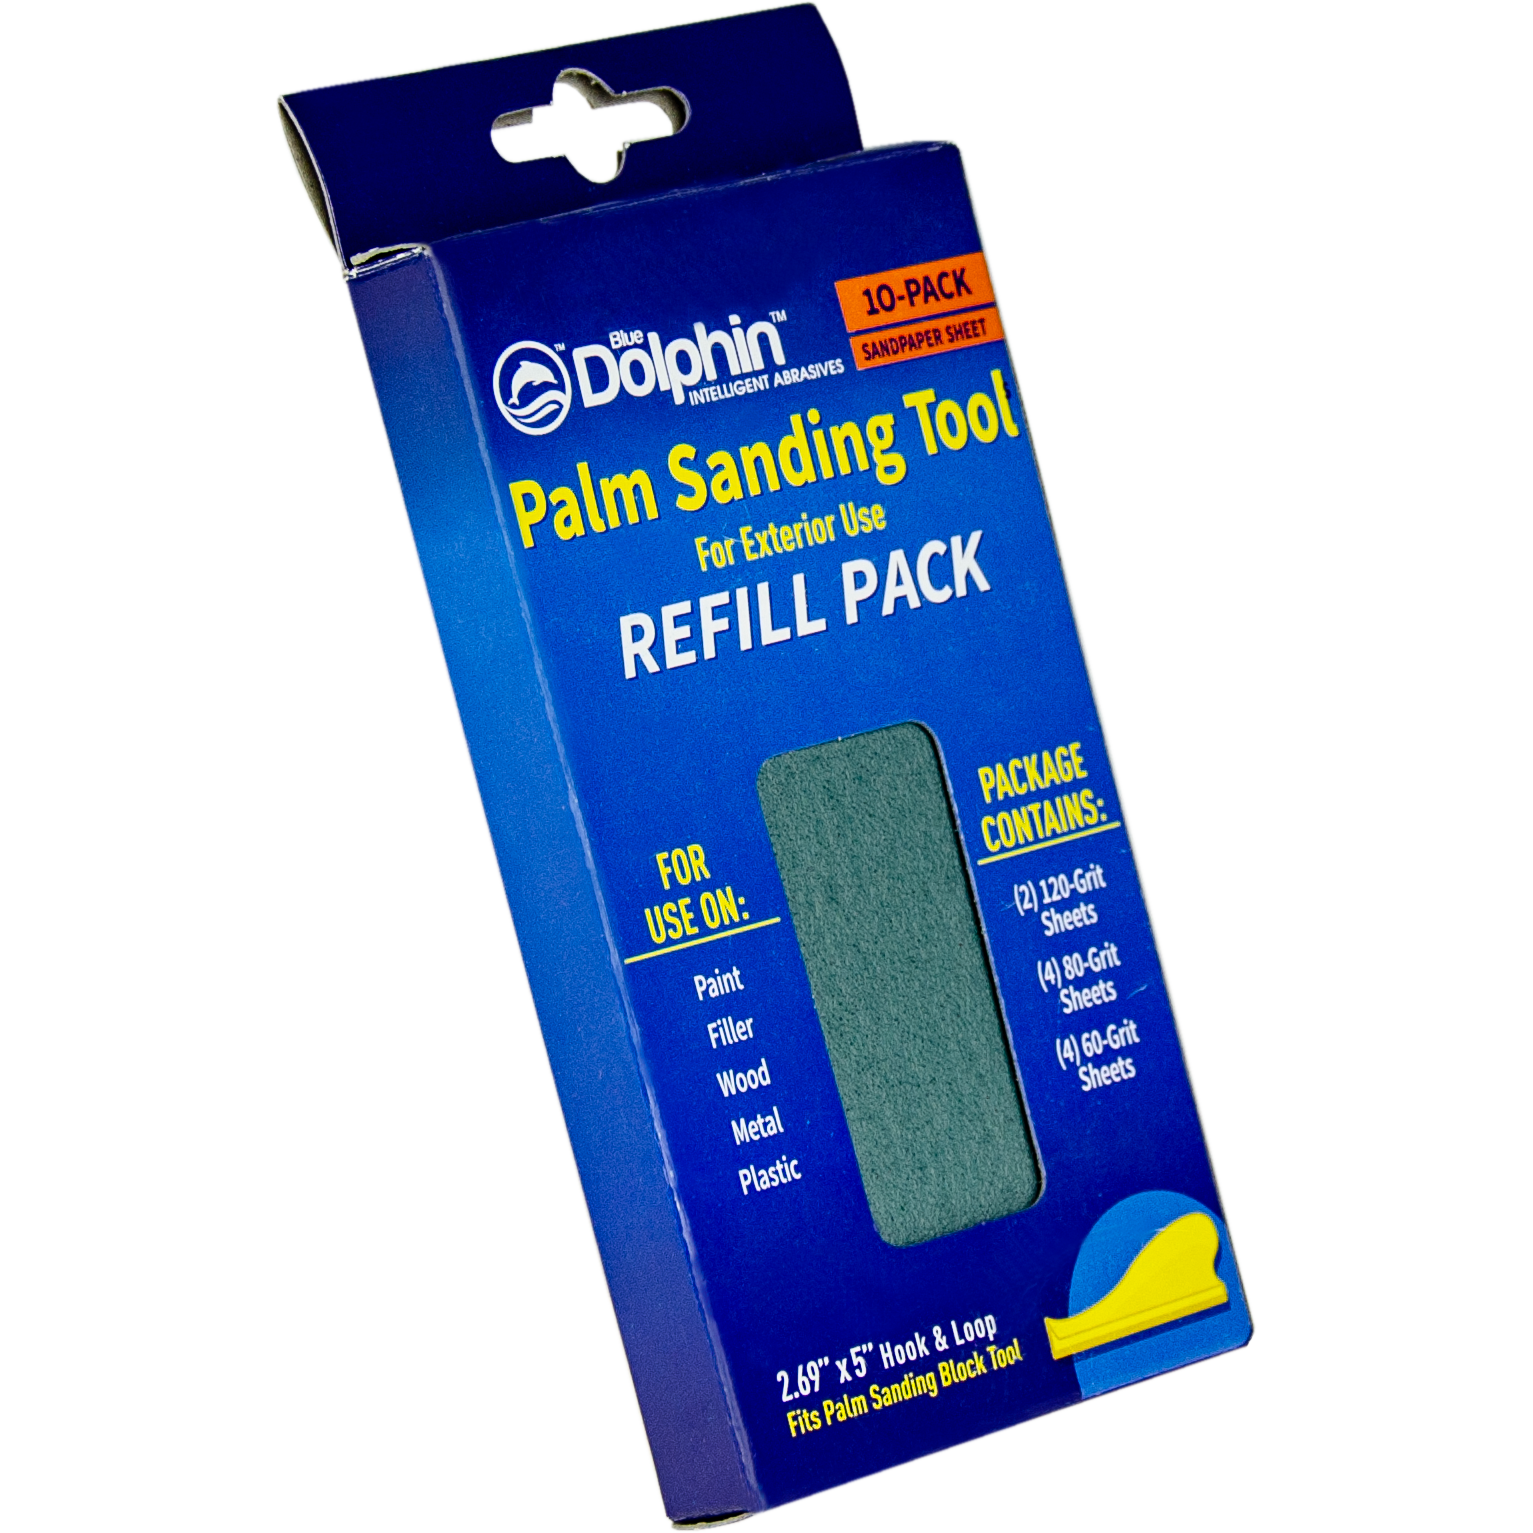 Blue Dolphin Palm Sanding Tool Refill (10 Pack)